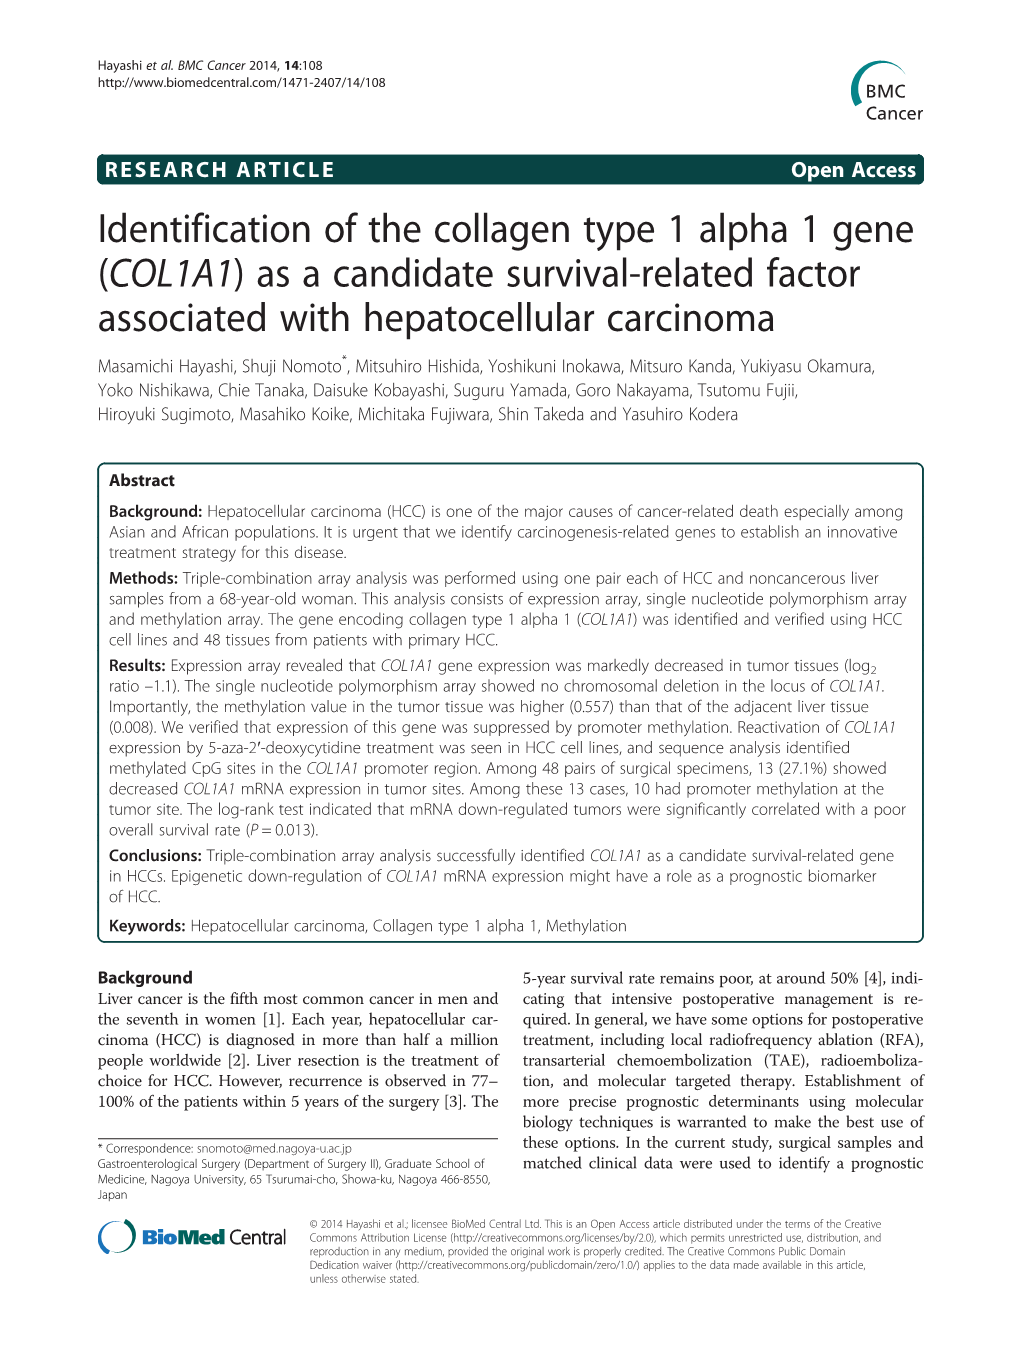 Identification of the Collagen Type 1 Alpha 1 Gene (COL1A1)